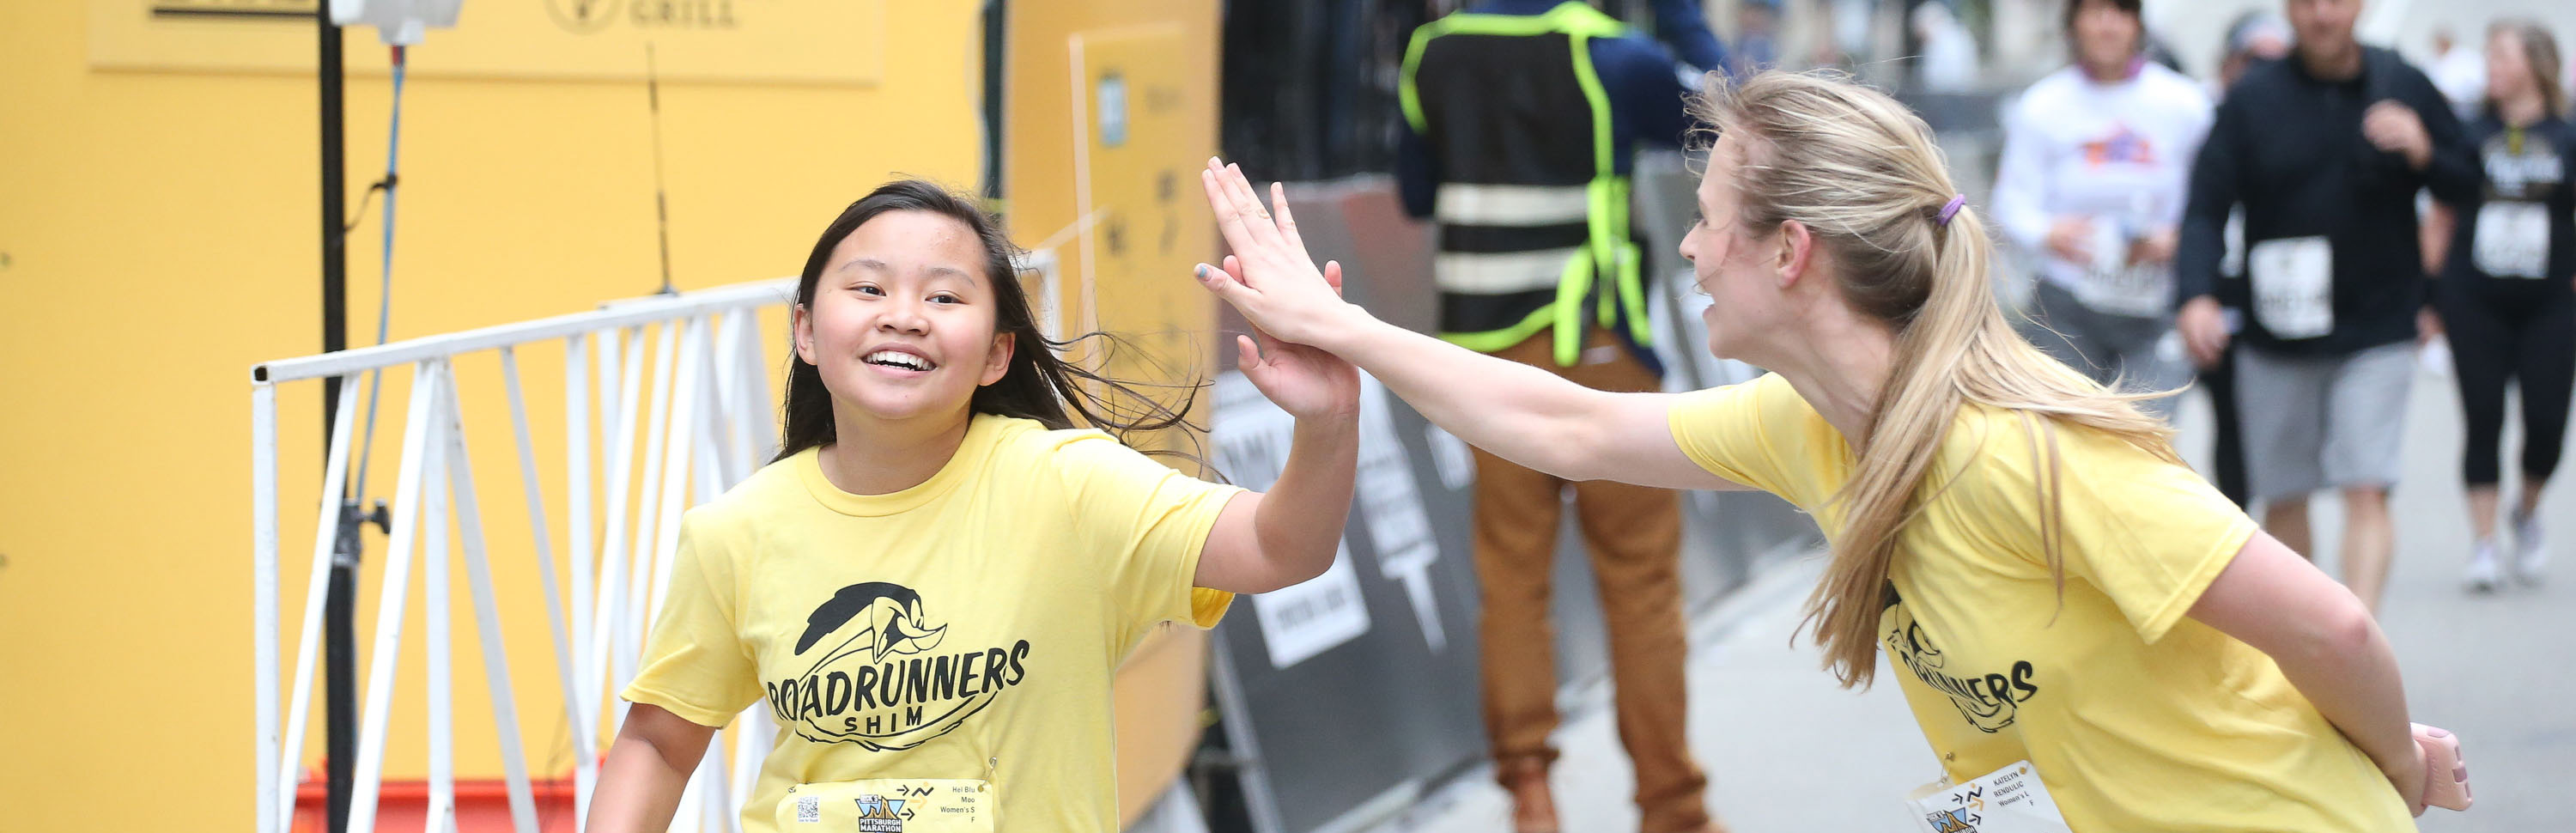 Young girl running in the UPMC Health Plan/UPMC Sports Medicine Pittsburgh 5K gives high-five to young woman